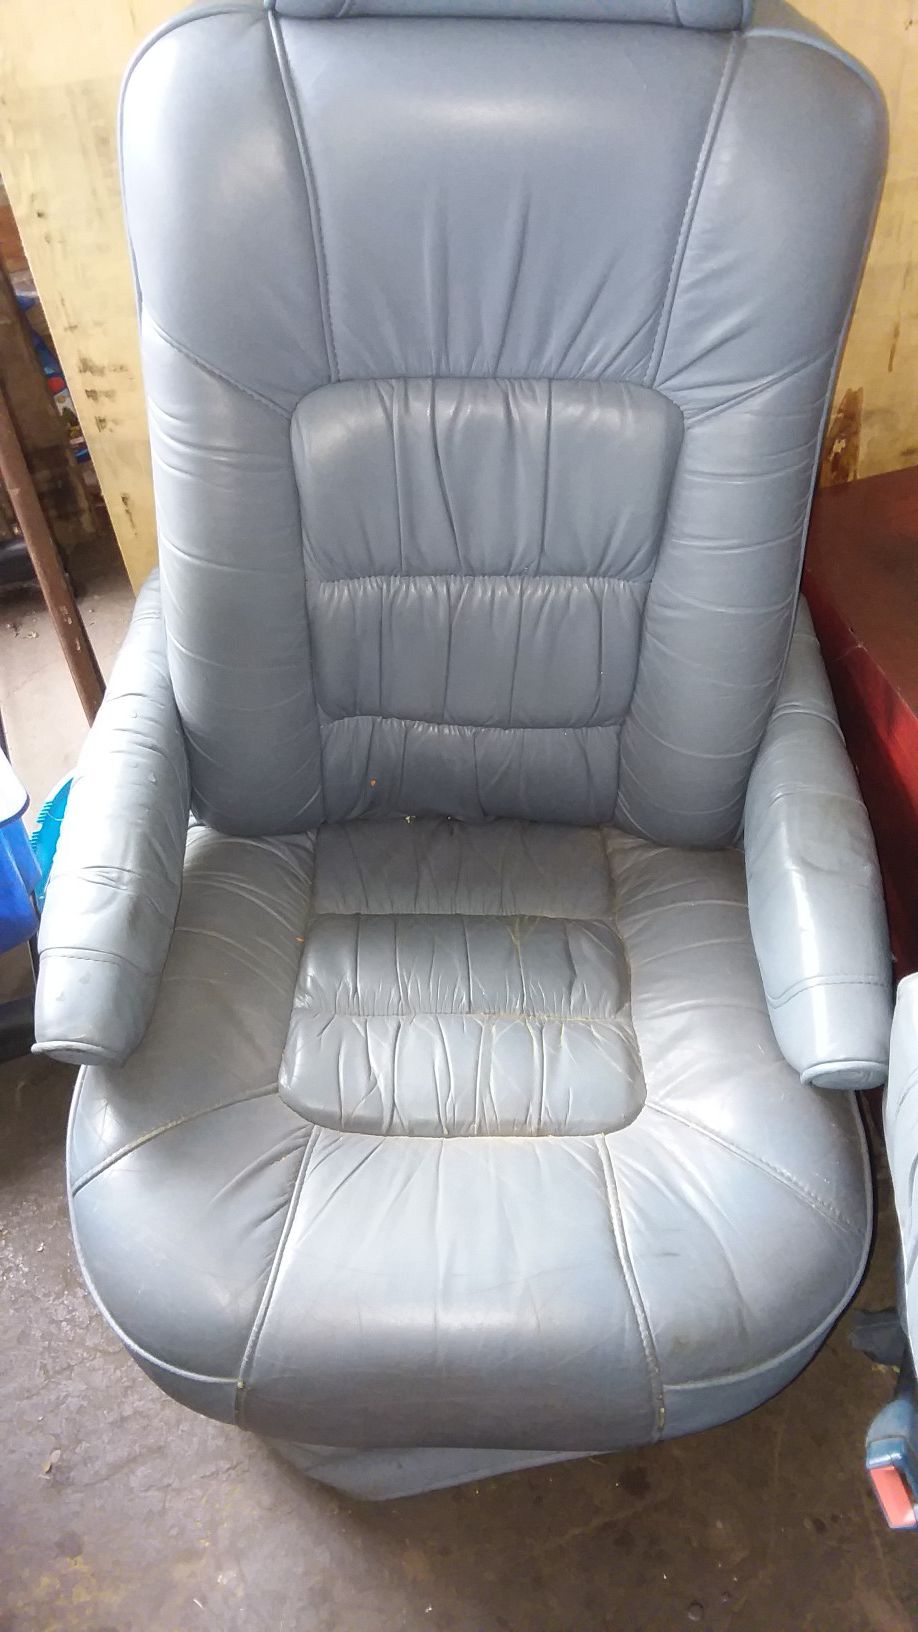 Two seats good condition